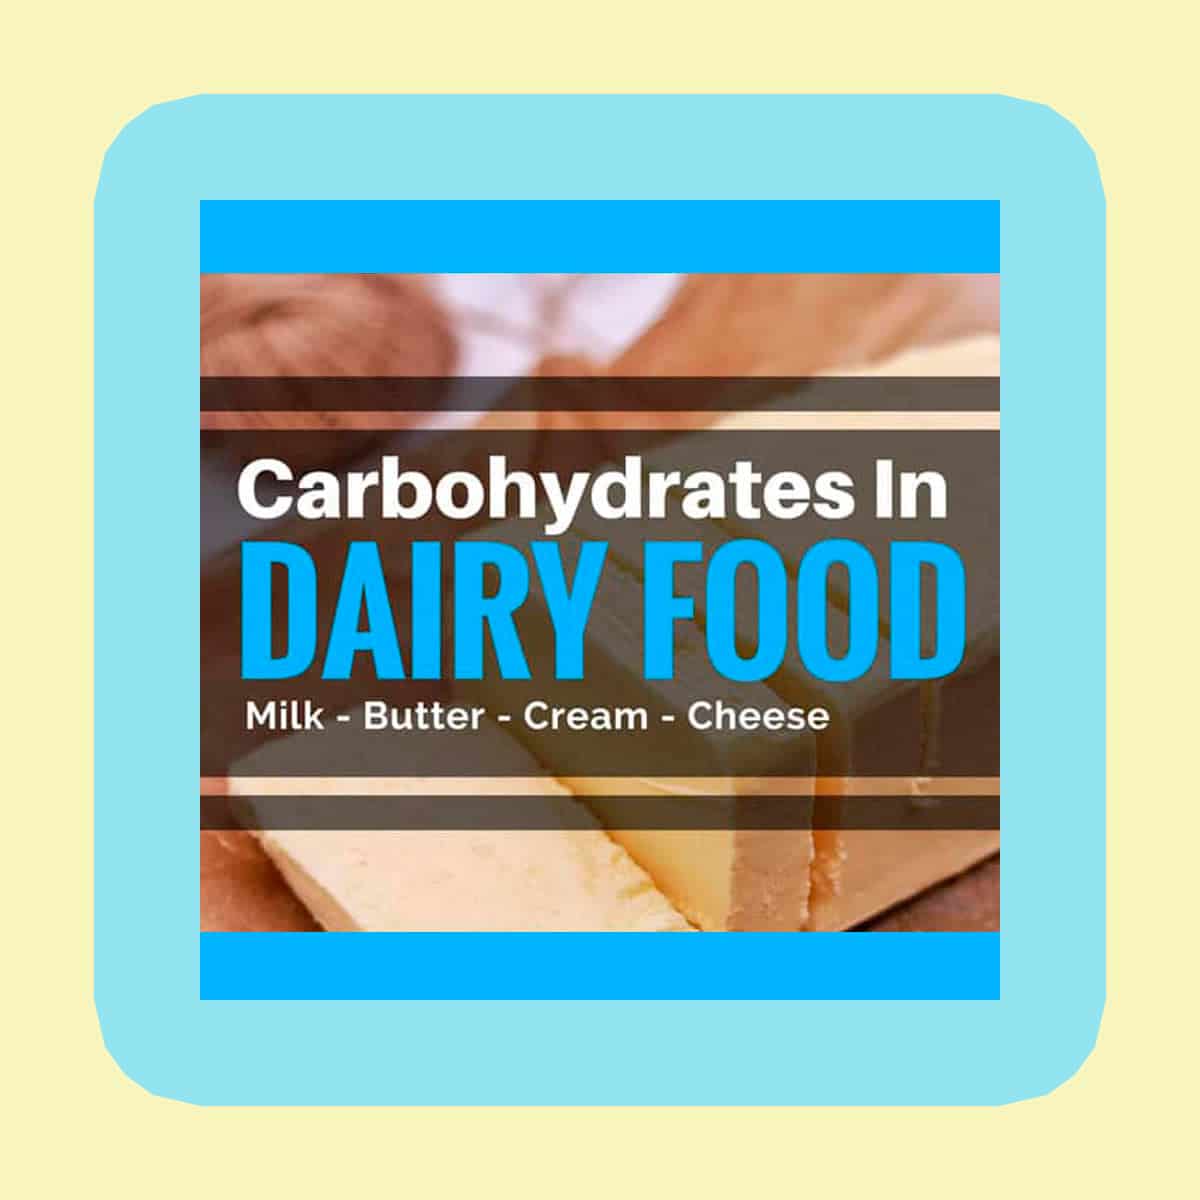 Carbohydrates in milk, cheese, butter and yogurt